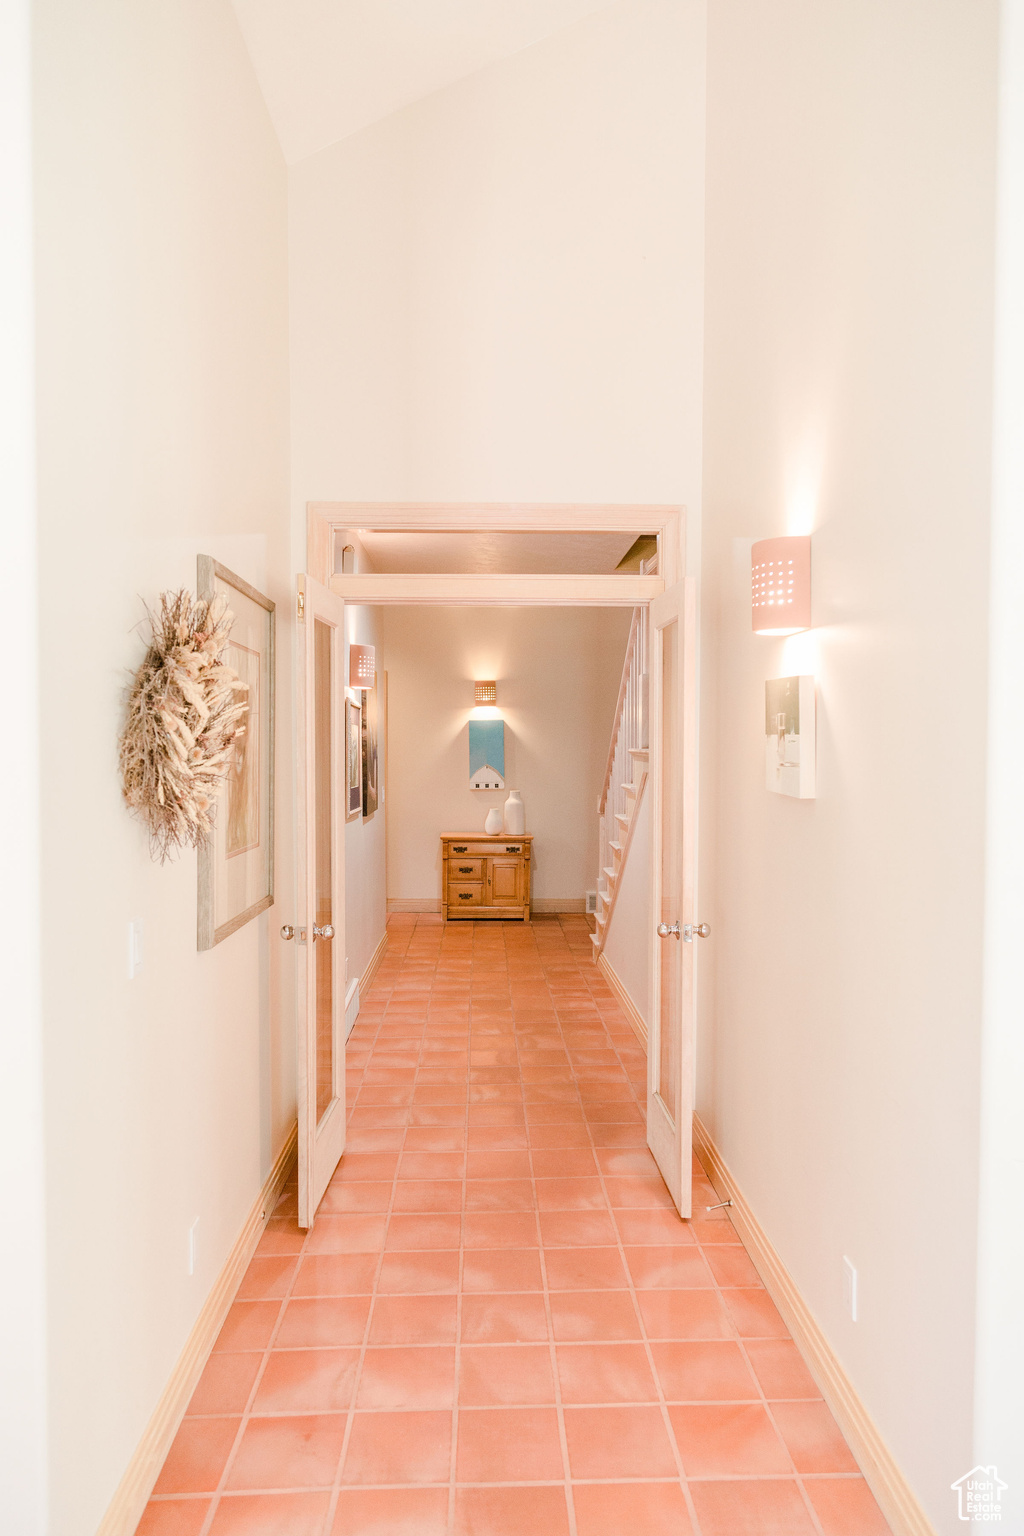 5 ft wide Hall with light tile flooring and lofted ceiling